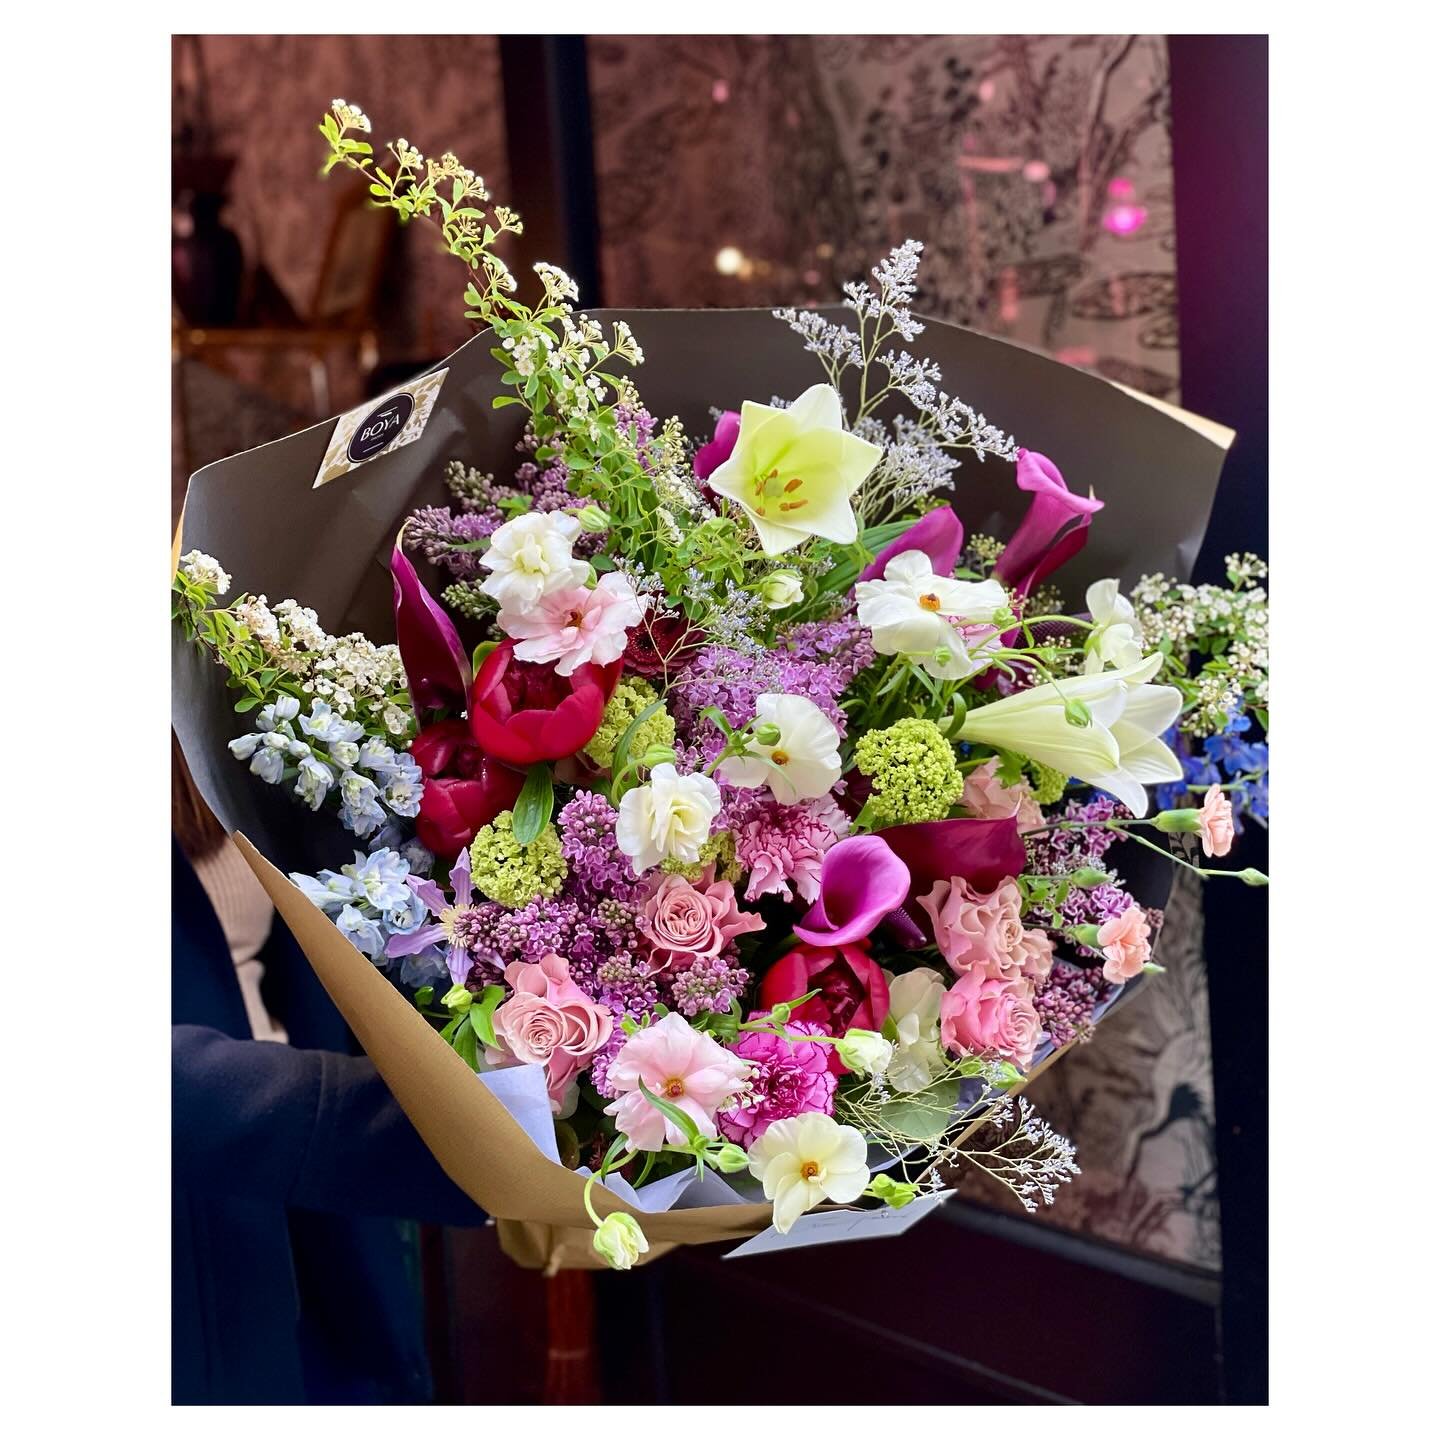 Do you think there are typical bouquets for men and for women?
#bouquetformen